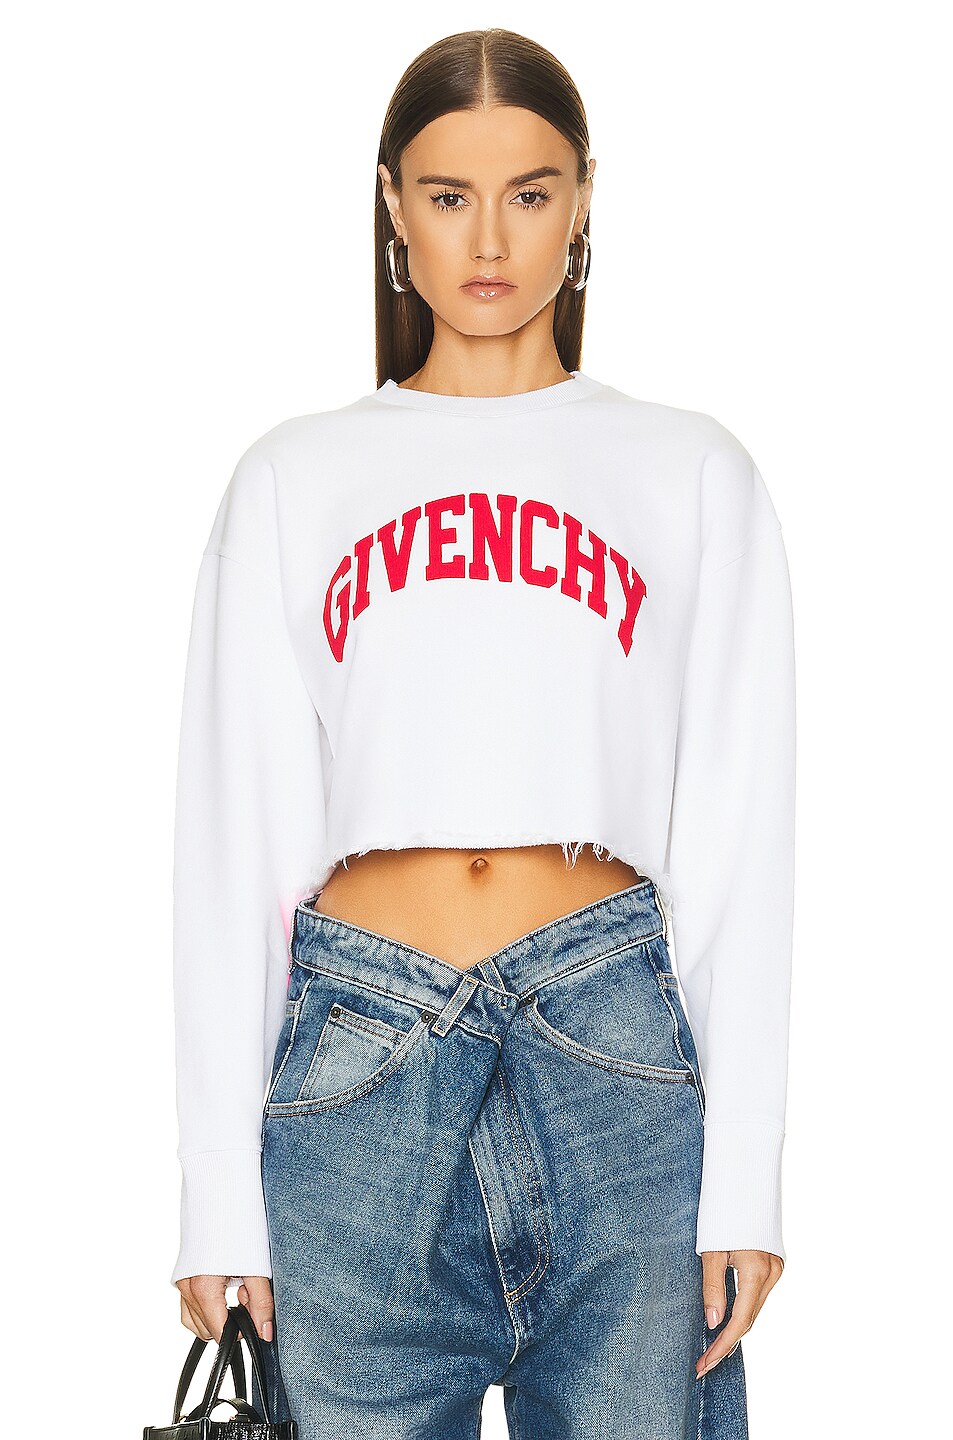 Givenchy Cropped Sweatshirt in White & Red | FWRD